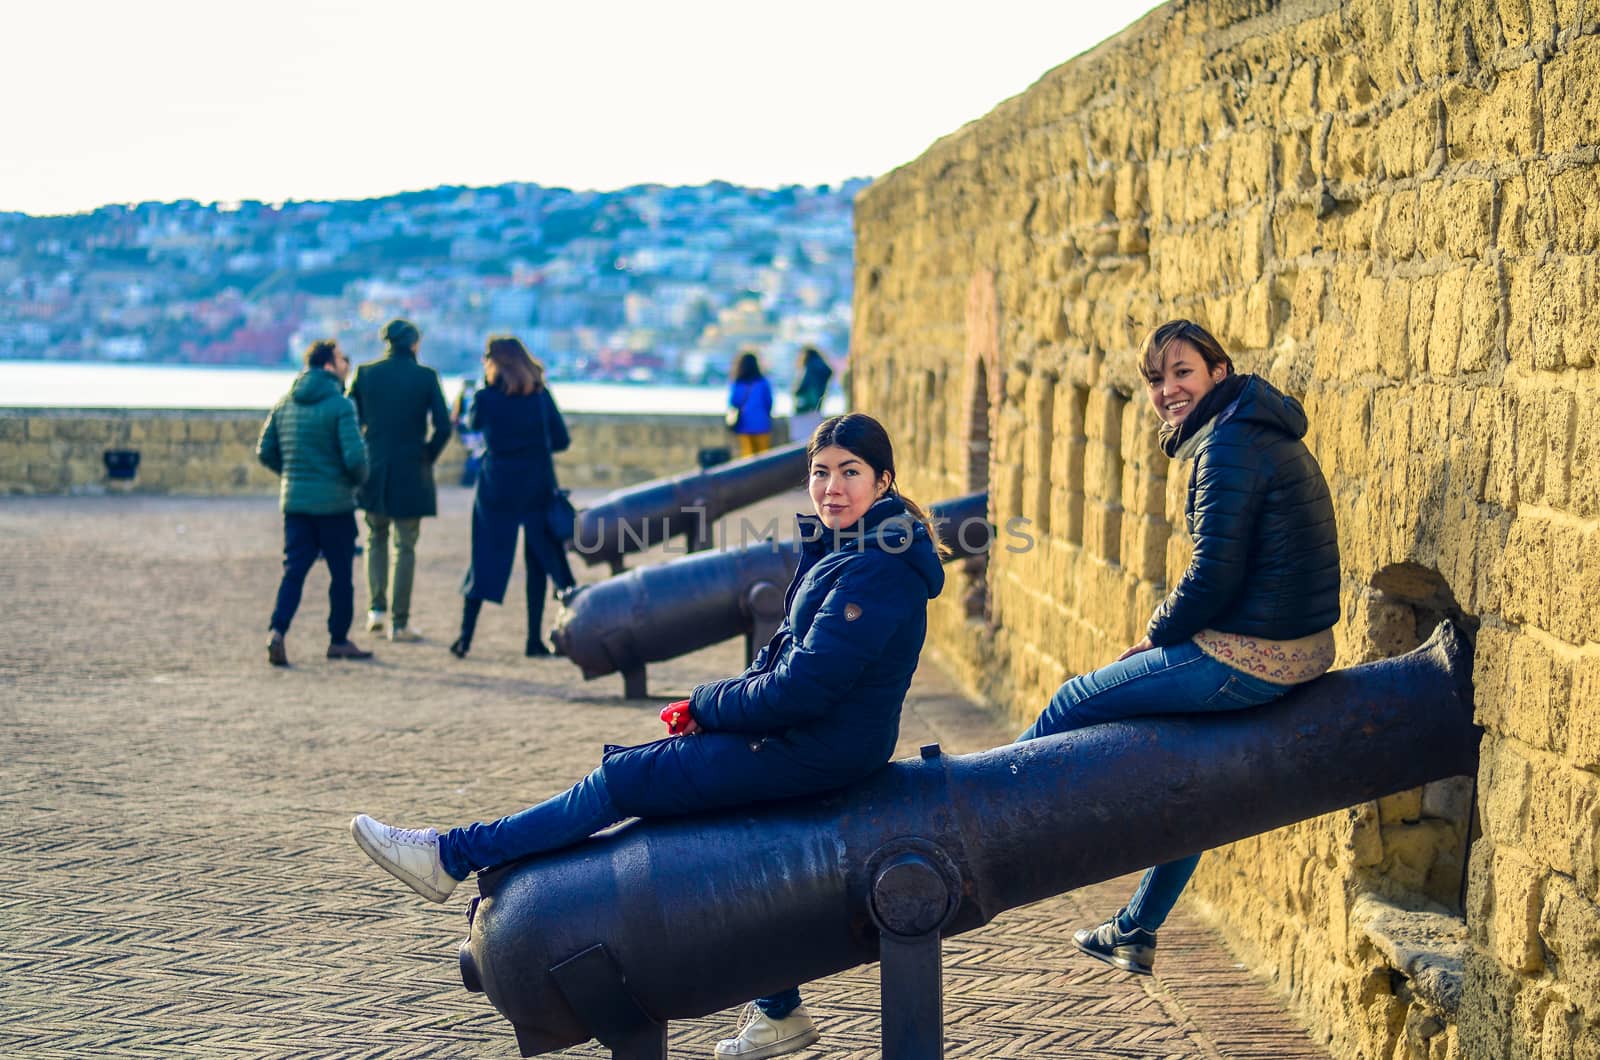 two women sit on the old guns and fortifications in the Castel dell'Ovo (Egg Castle) in Naples, Italy